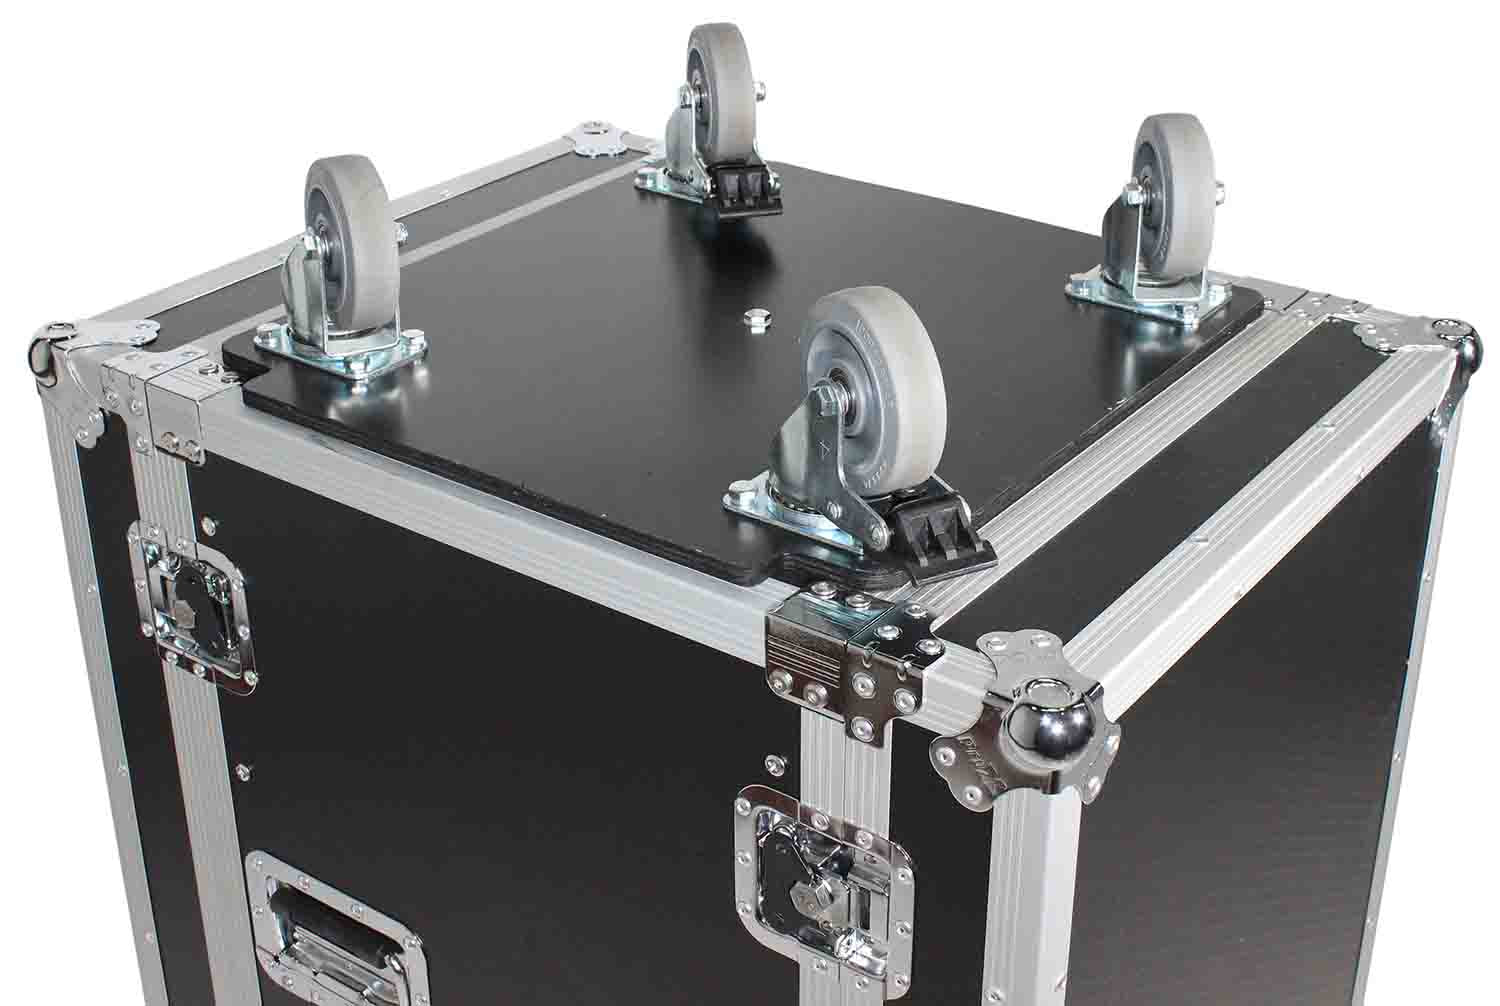 ProX XS-14R18W, 14U Space Amp Rack Mount ATA Flight Case 18 Inch Depth with Casters - Hollywood DJ